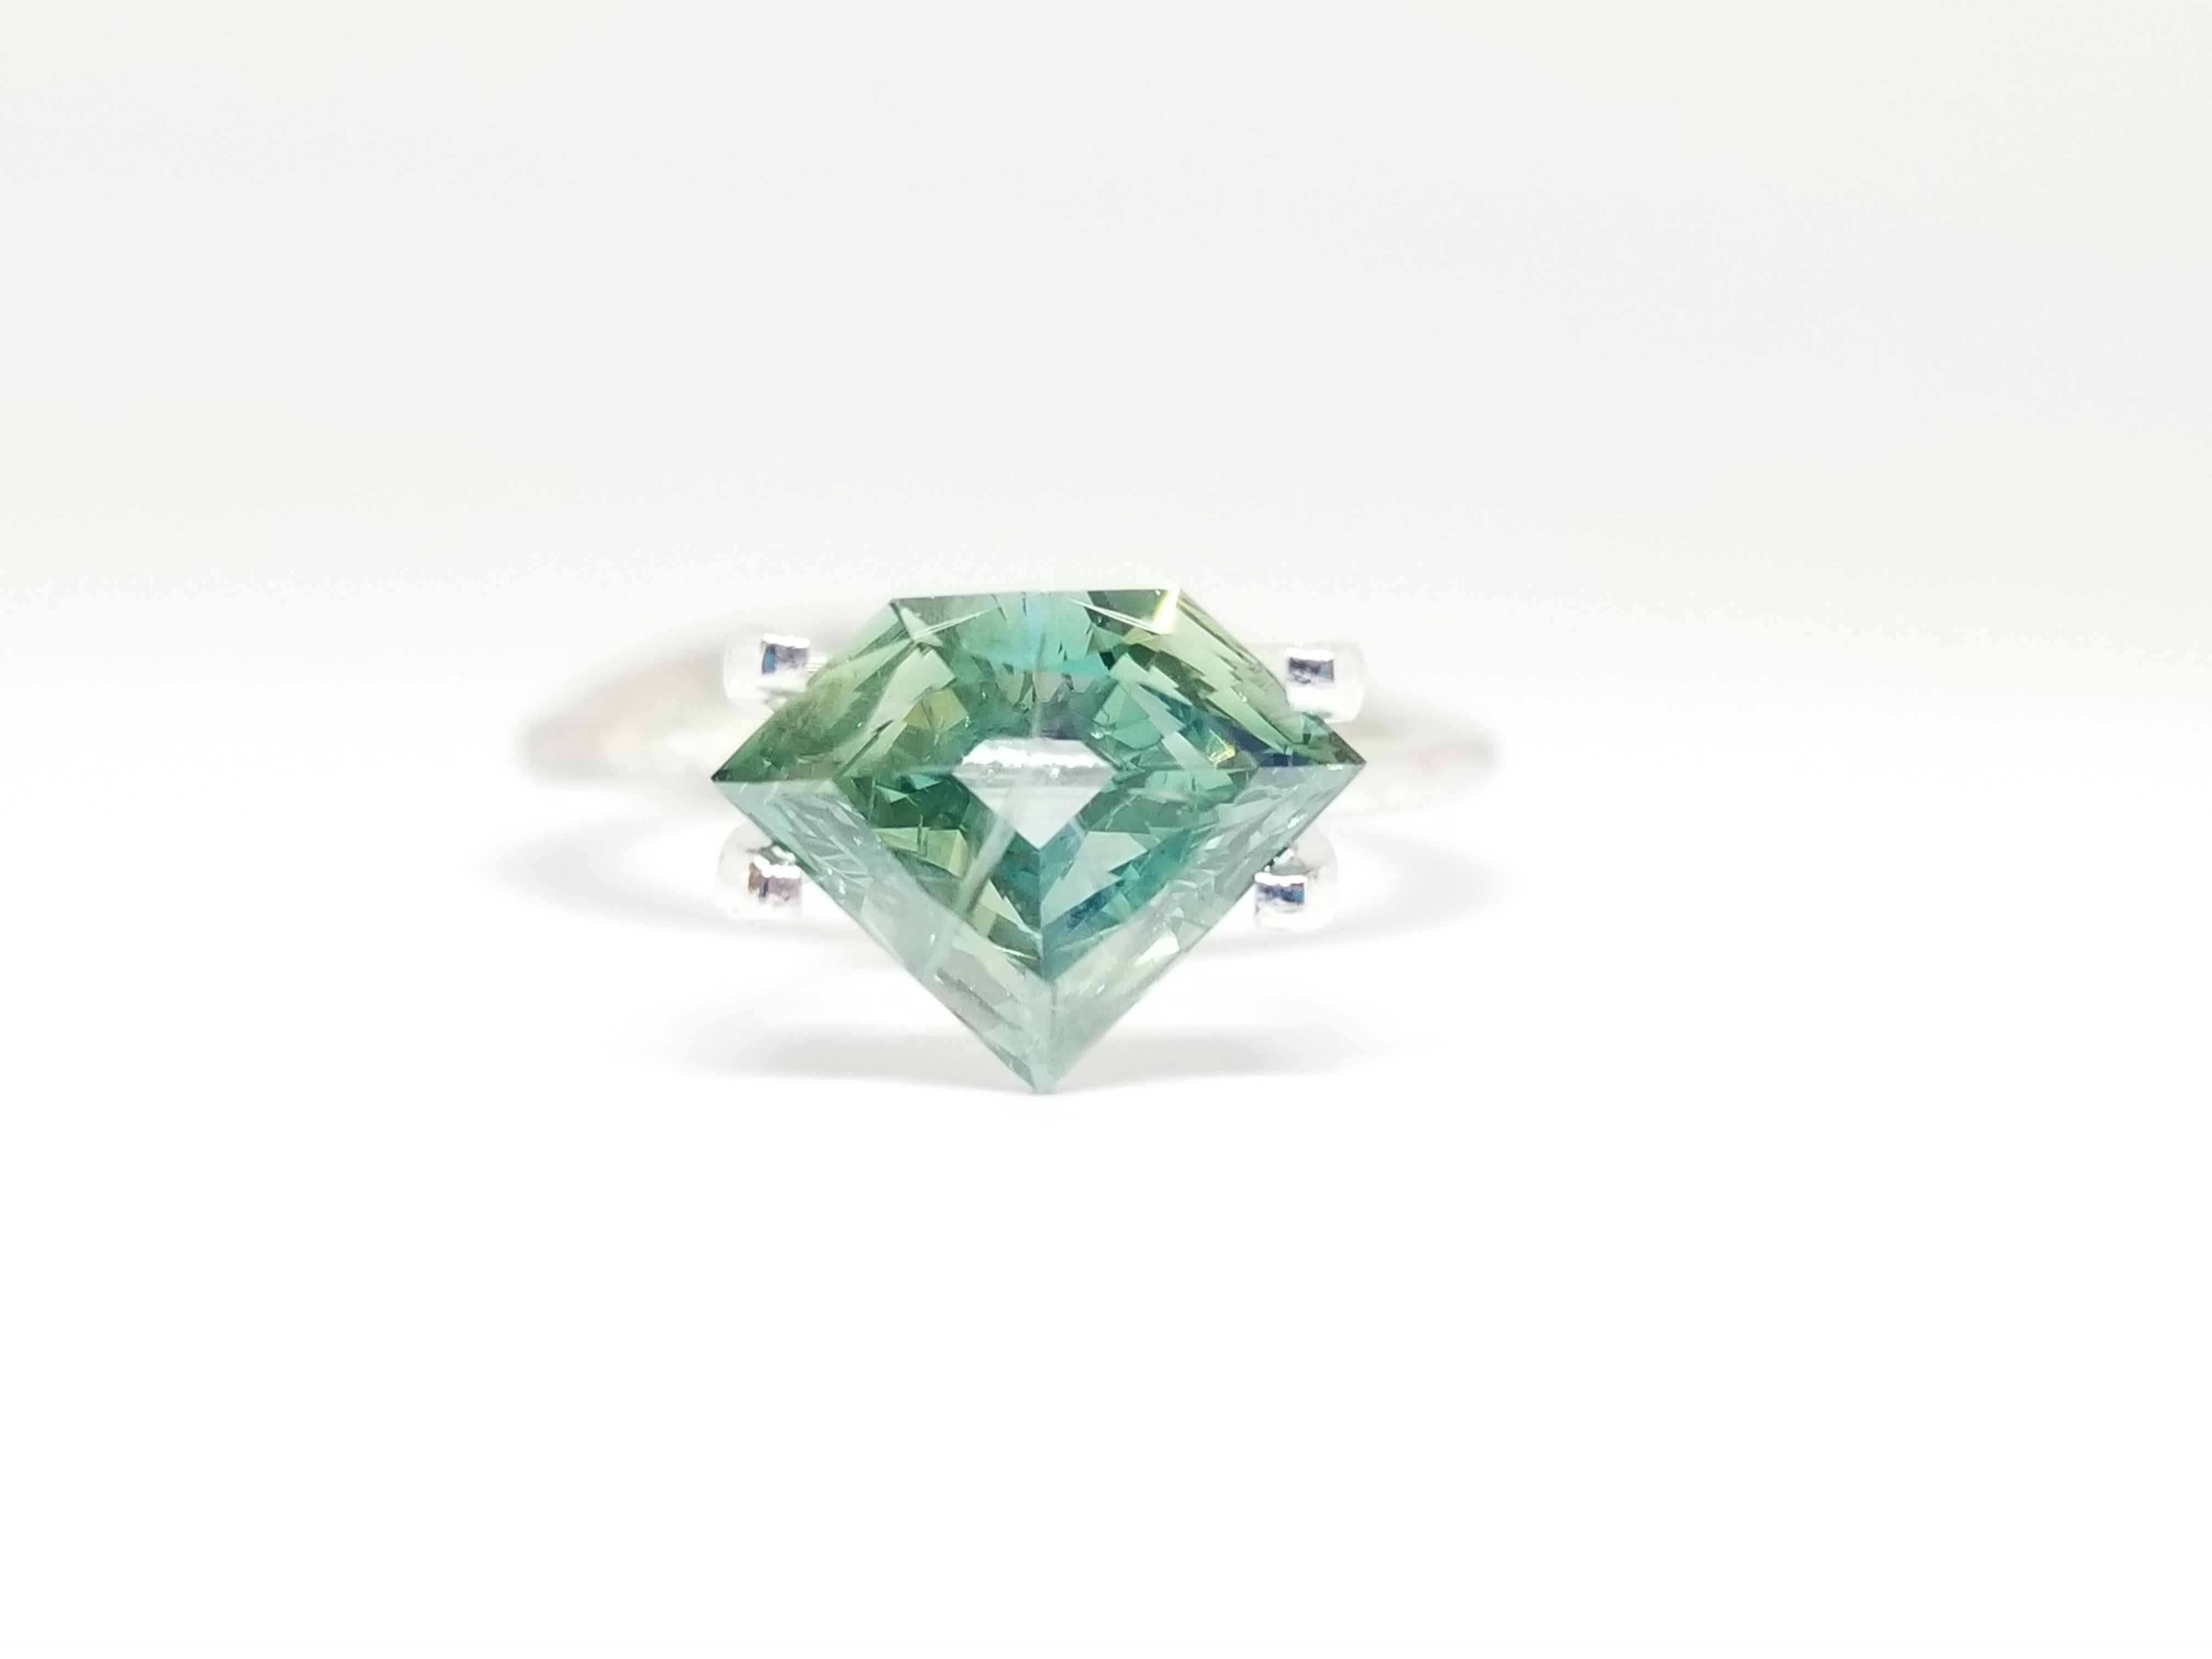 One very special piece shield shape diamond with transparent bluish green color weighing 1.51 carats by GIA. Treated clarity. Set on 4-prong 14K solitaire white gold. this ring is the ultimate gift for anniversaries, birthdays, and all